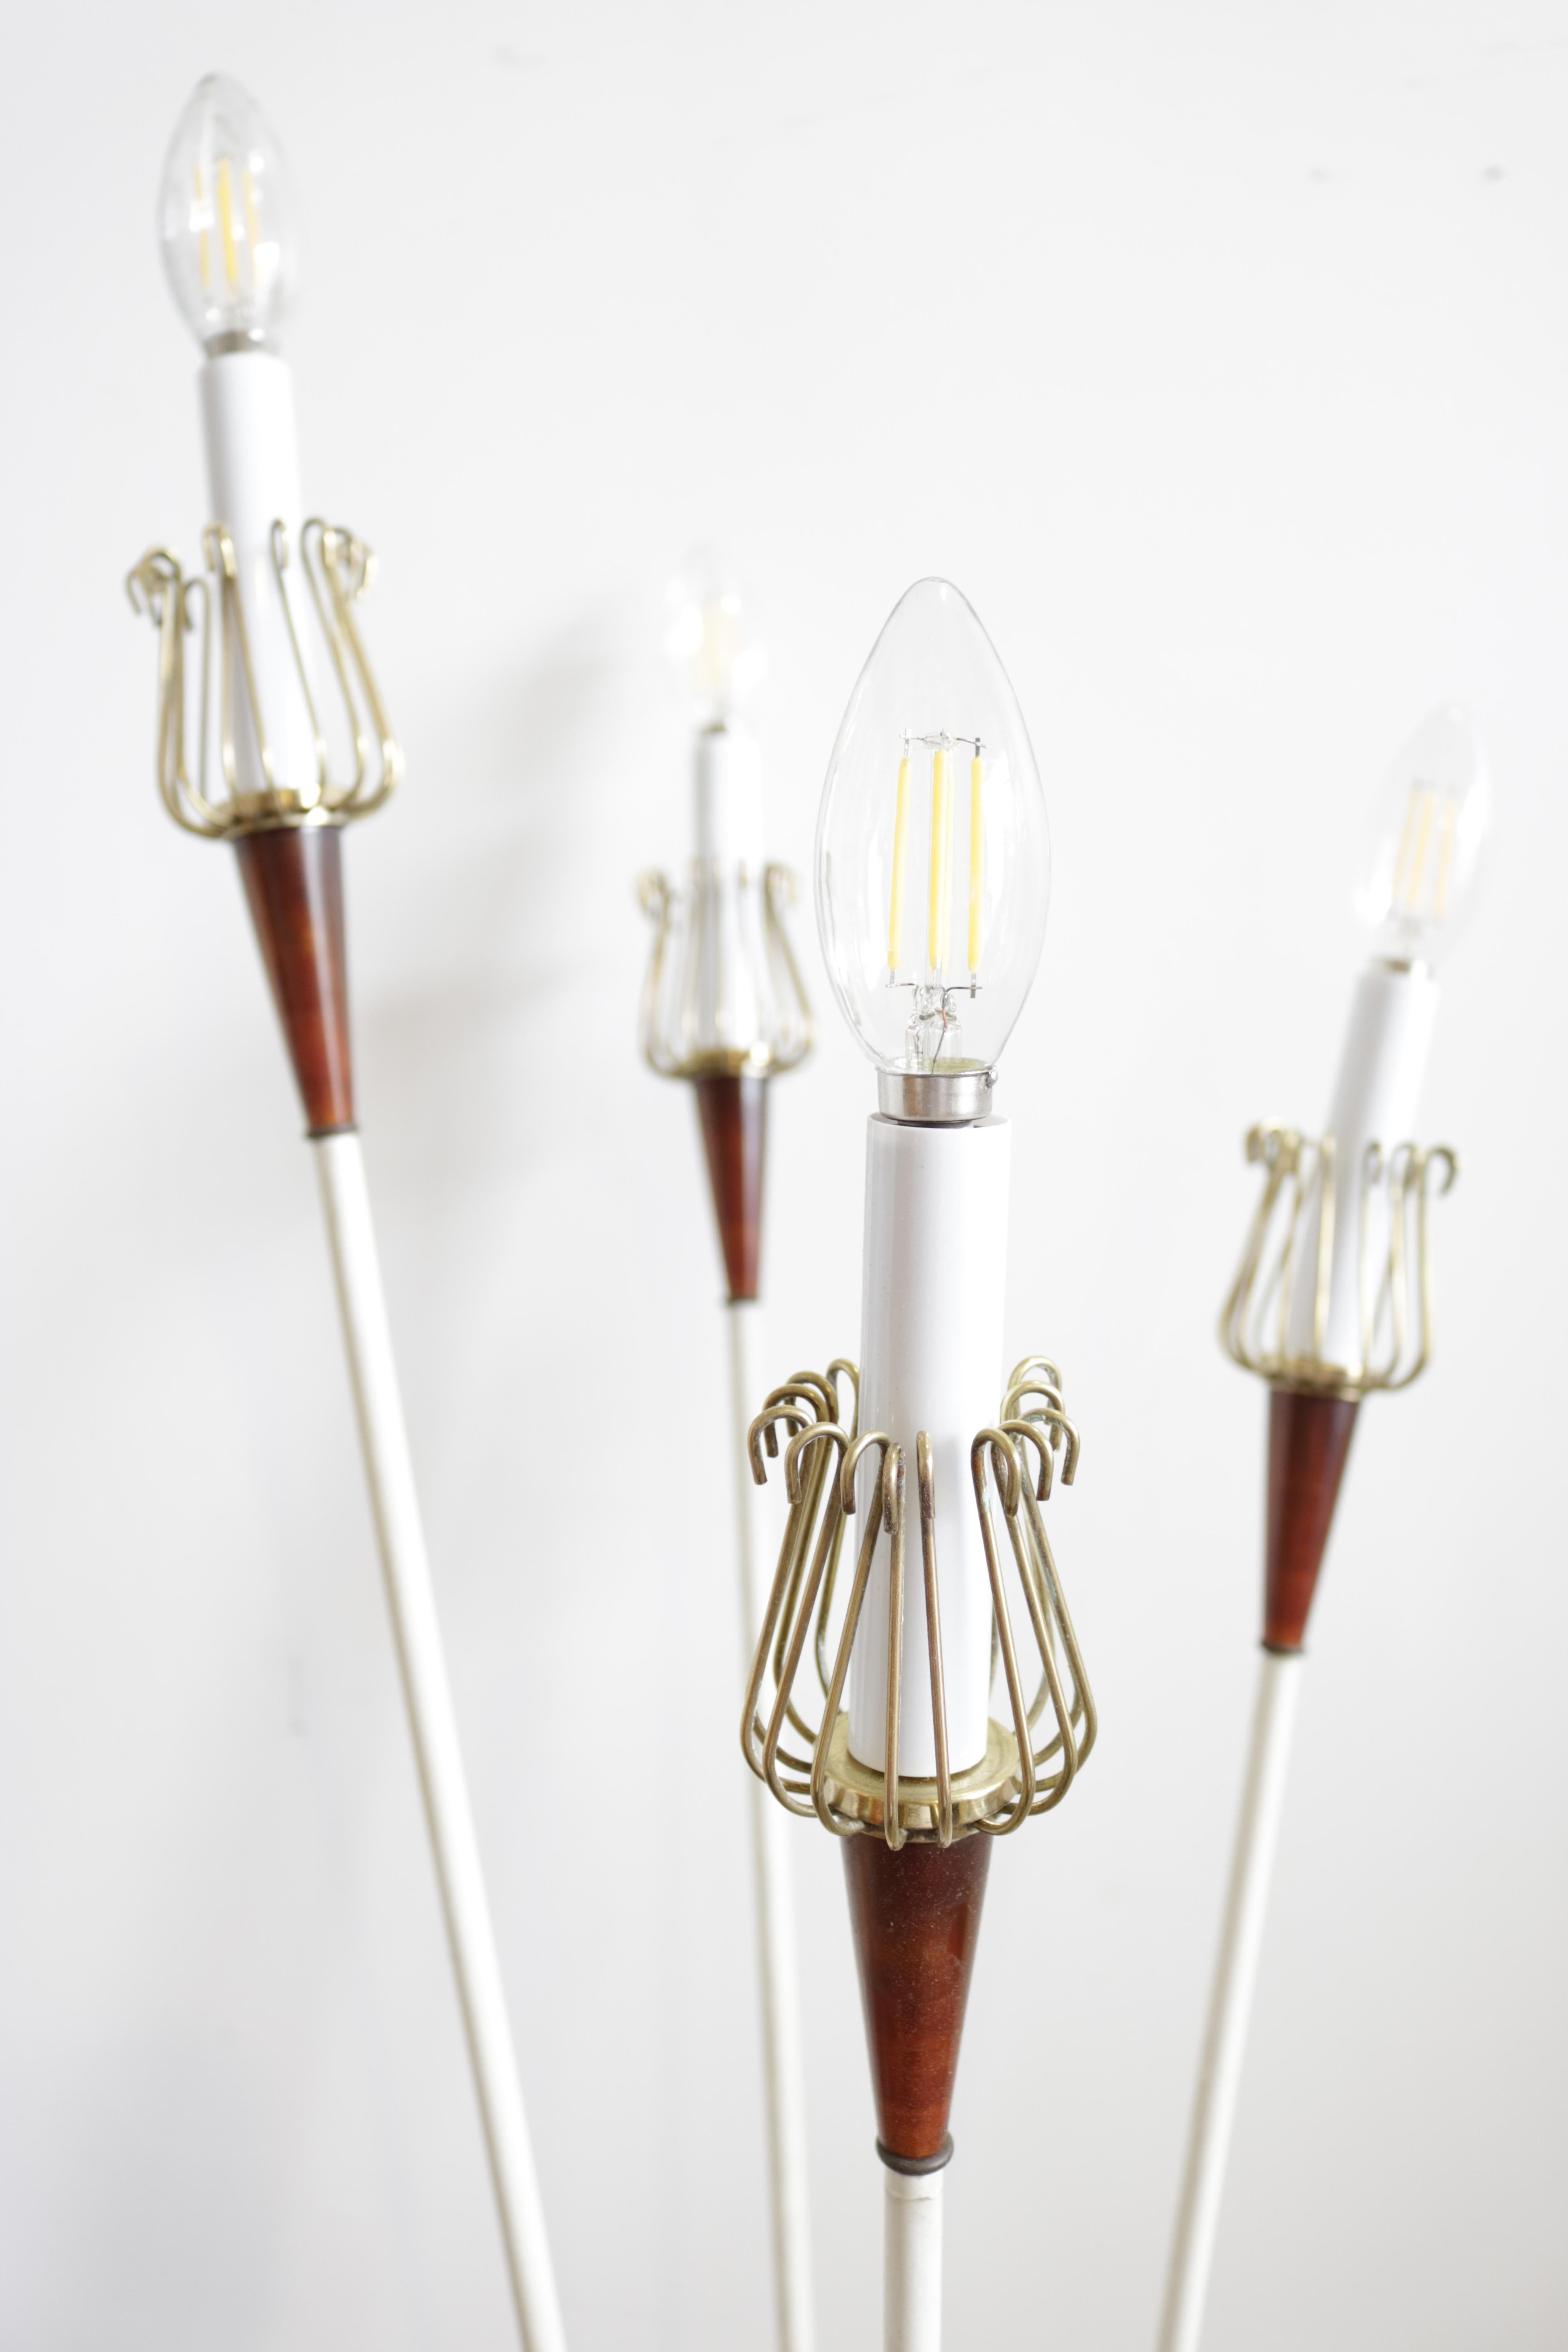 Charming 1950s floor lamp designed by Maison Lunel, Paris, France.
Each lamp is comprised of four lamp holders in brass cages supported by cone-shaped red plexiglass supports. The white circular metal bases are finished with brass edging.
Base